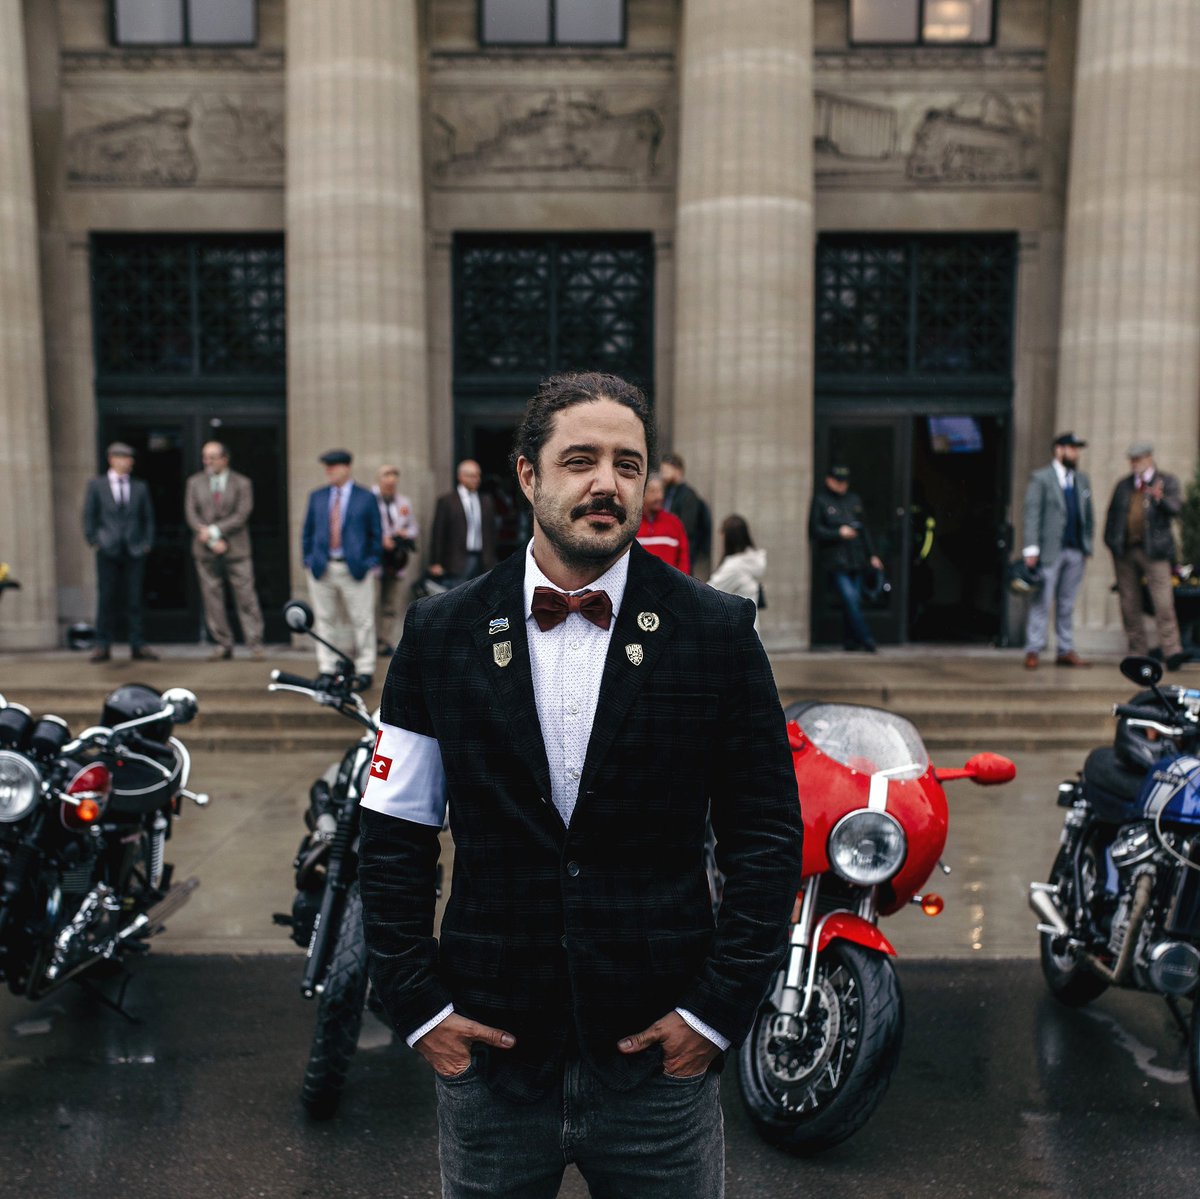 Introducing Jeff, our long time DGR host in Hamilton, Canada. Jeff has led the ride since 2017 with the city contributing almost $500K USD over the last 6 years to our fundraising efforts. Thank you Jeff and all our amazing ride hosts. 🌎 Hamilton, Canada 📸 Kyle Poole